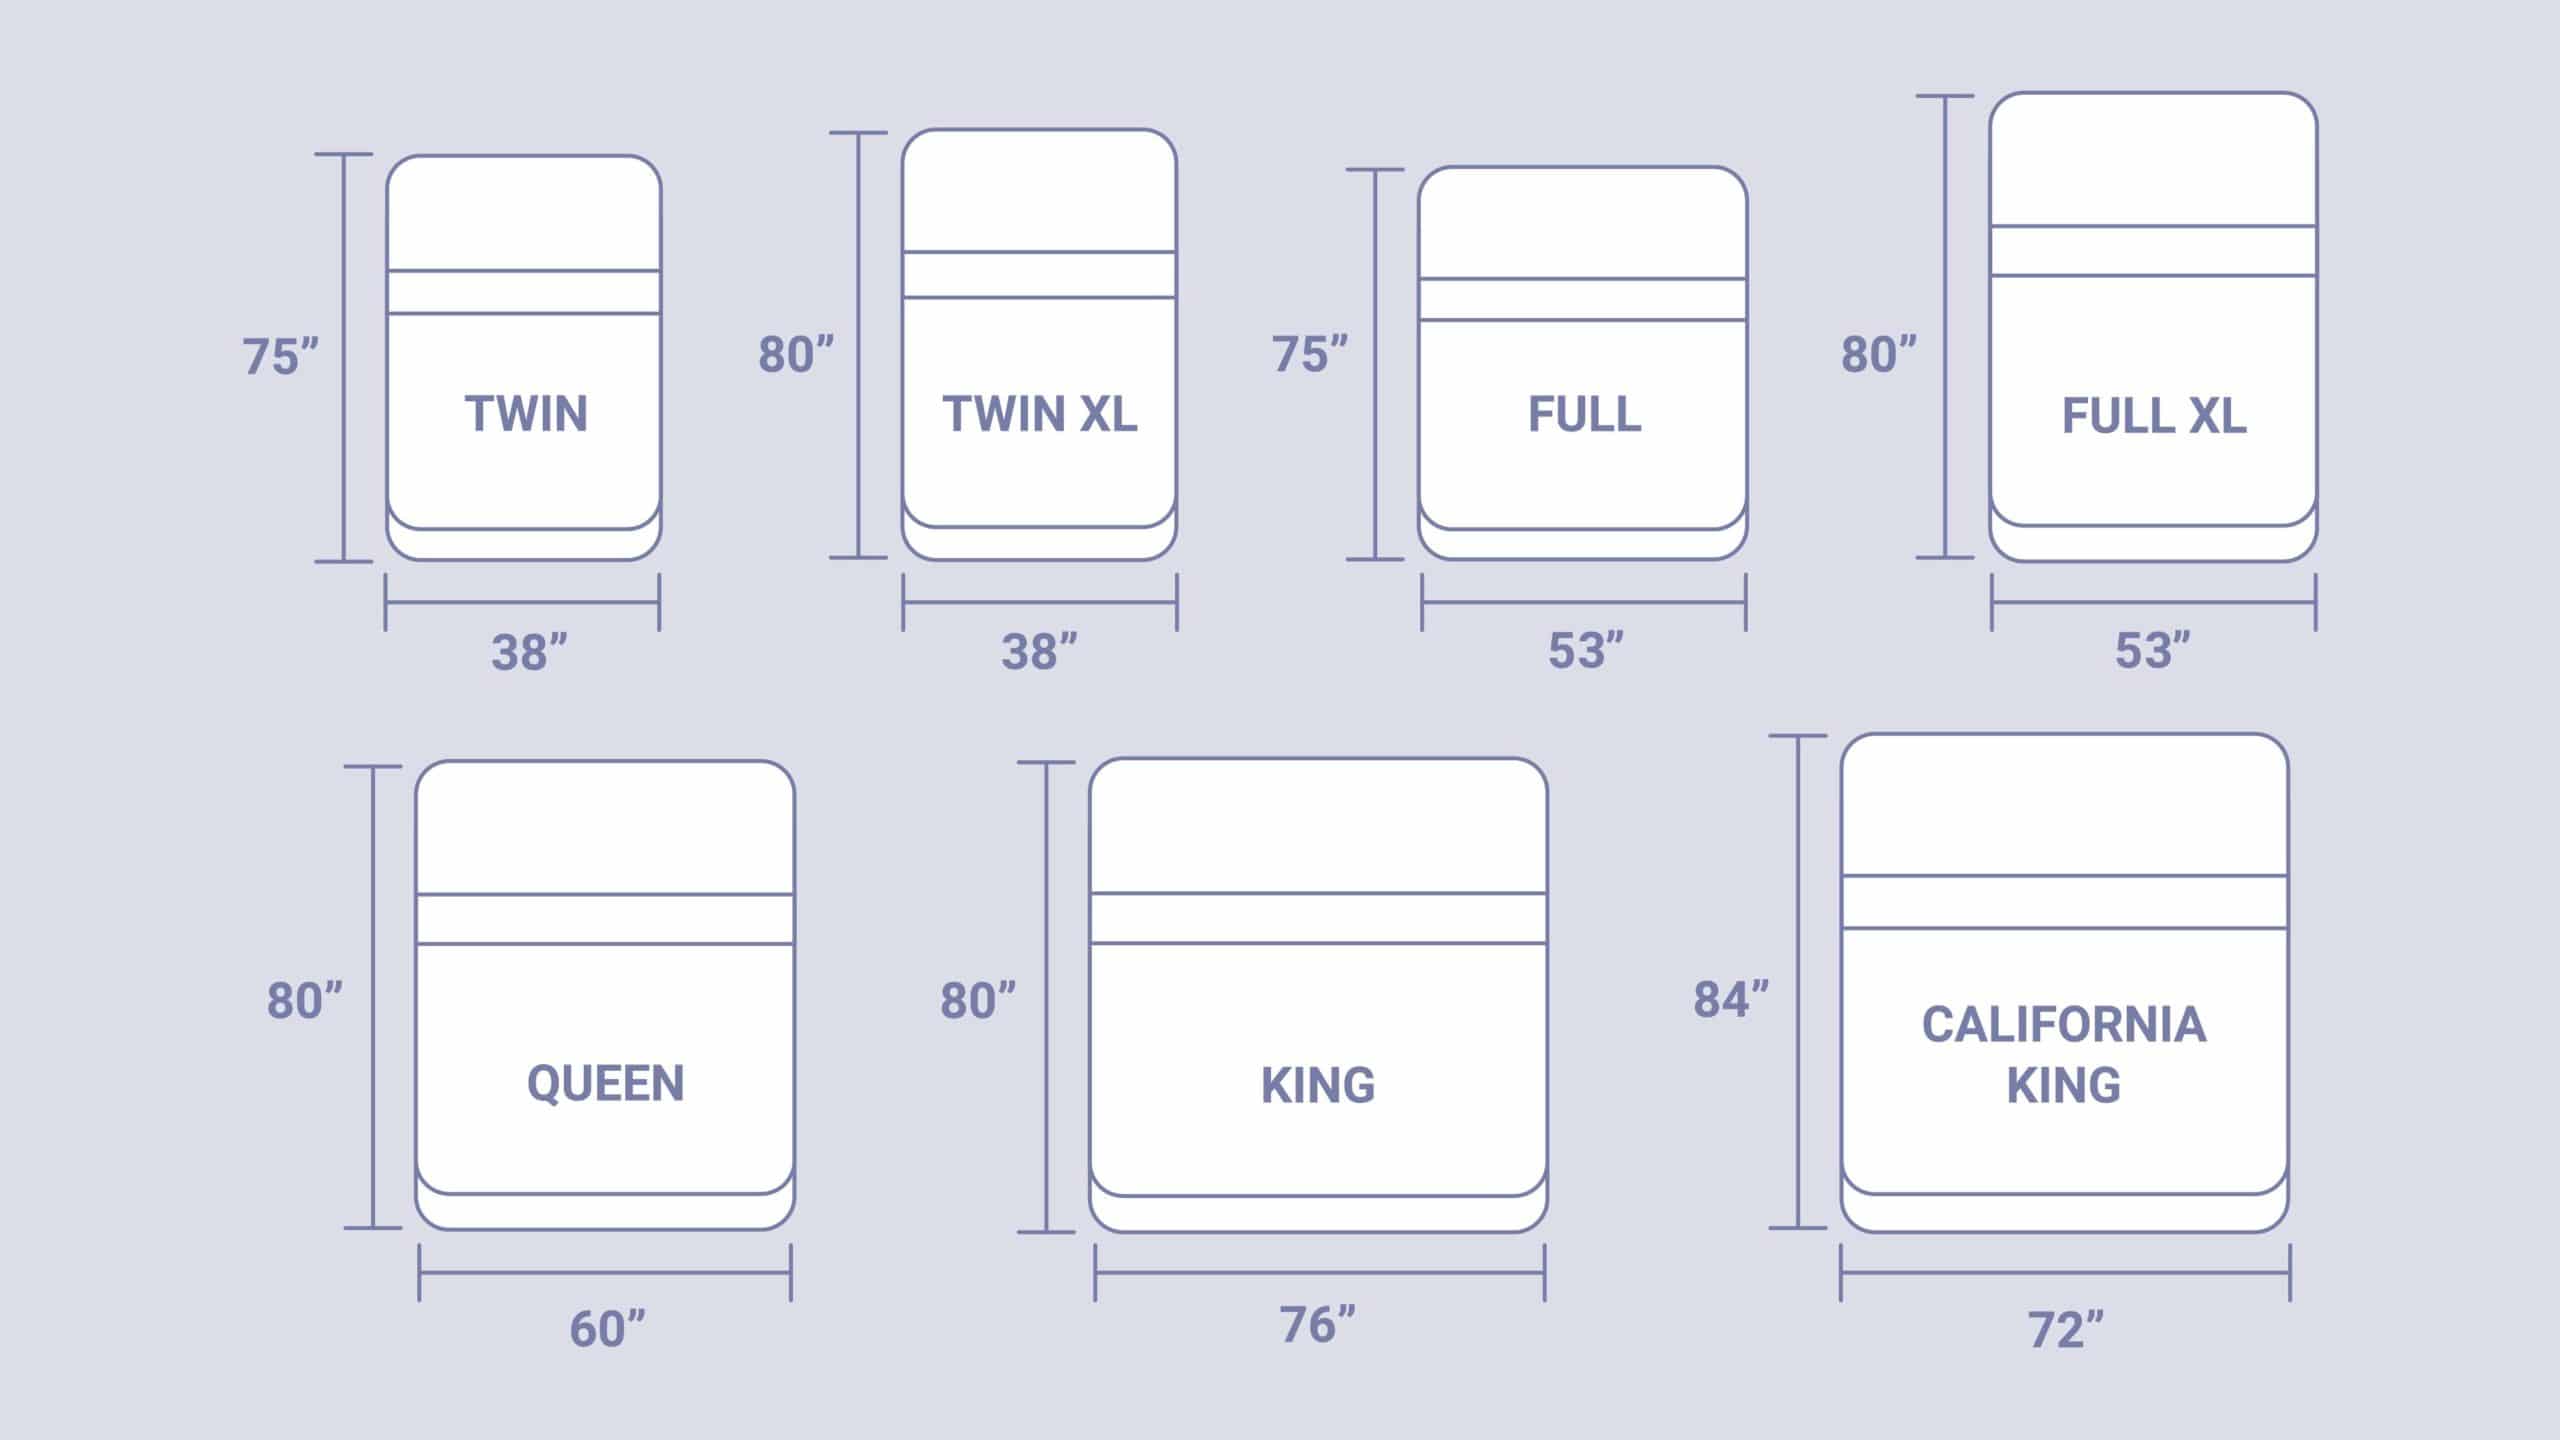 Mattress Sizes And Dimensions Guide, Are All California King Beds The Same Size